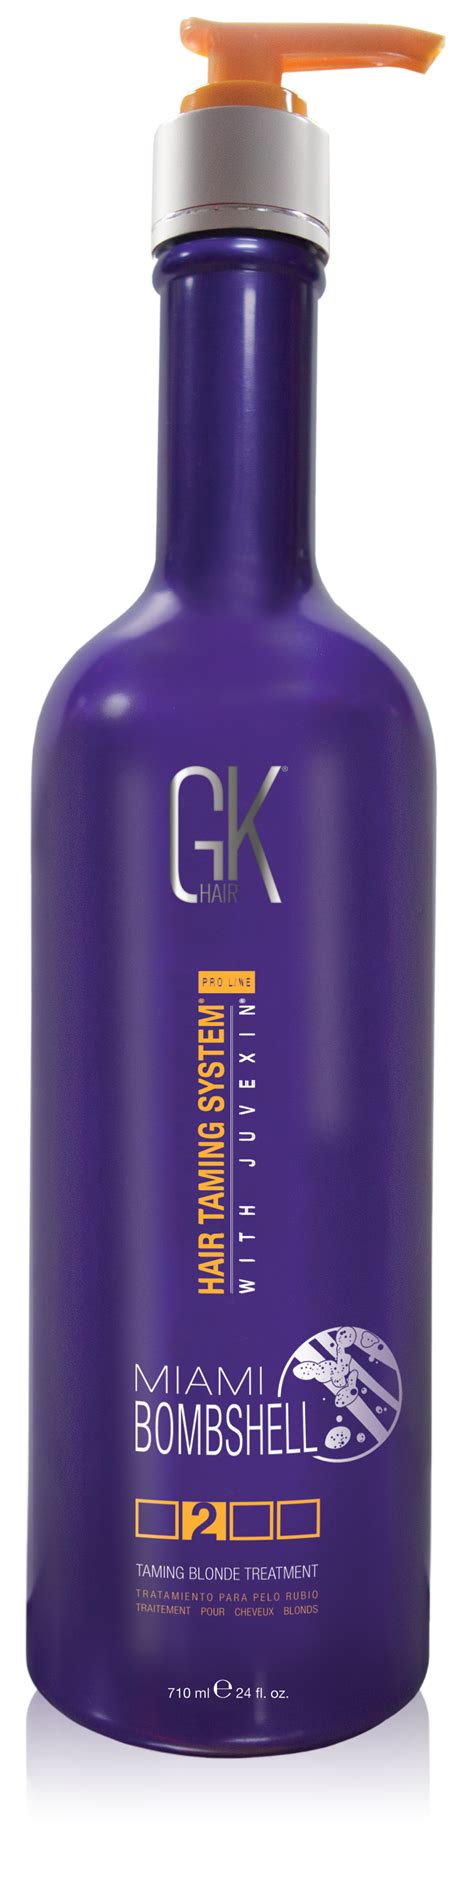 Gkhair Introduces Its New Hair Care Products In The Bombshell Series Specifically For Blonde Hair